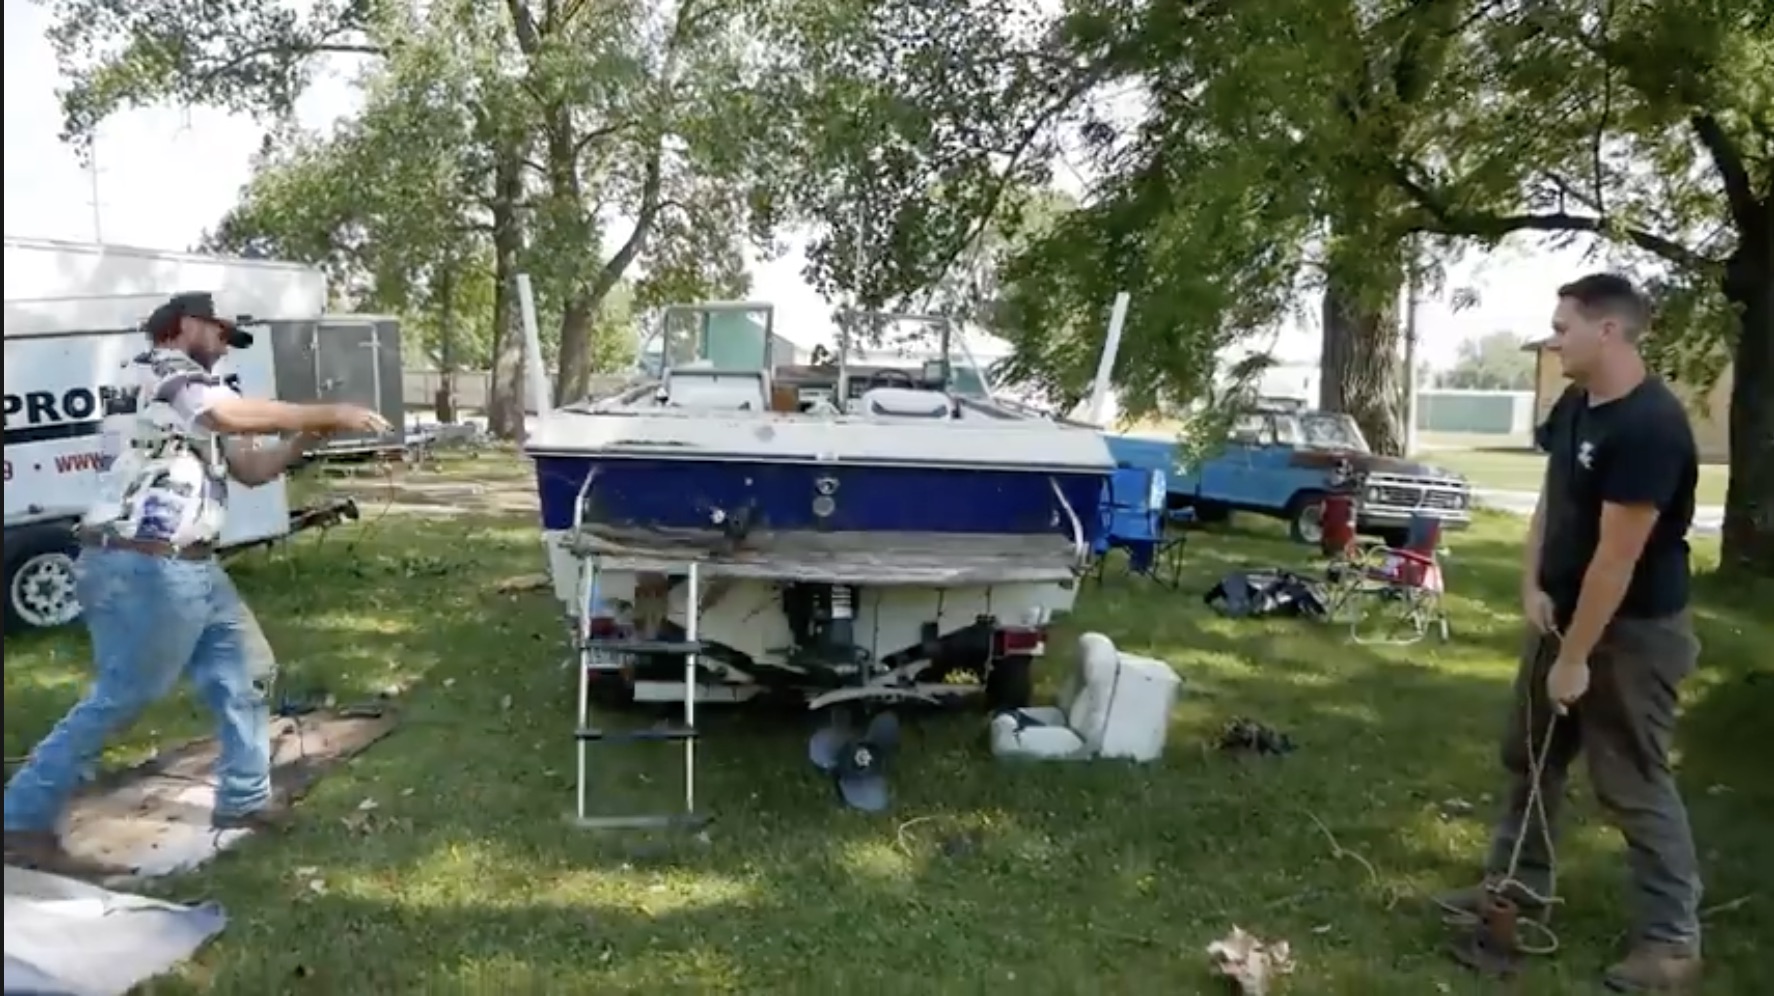 Motorboatin’: Reviving the Mercury Marine 302 In The Crappy Boat!